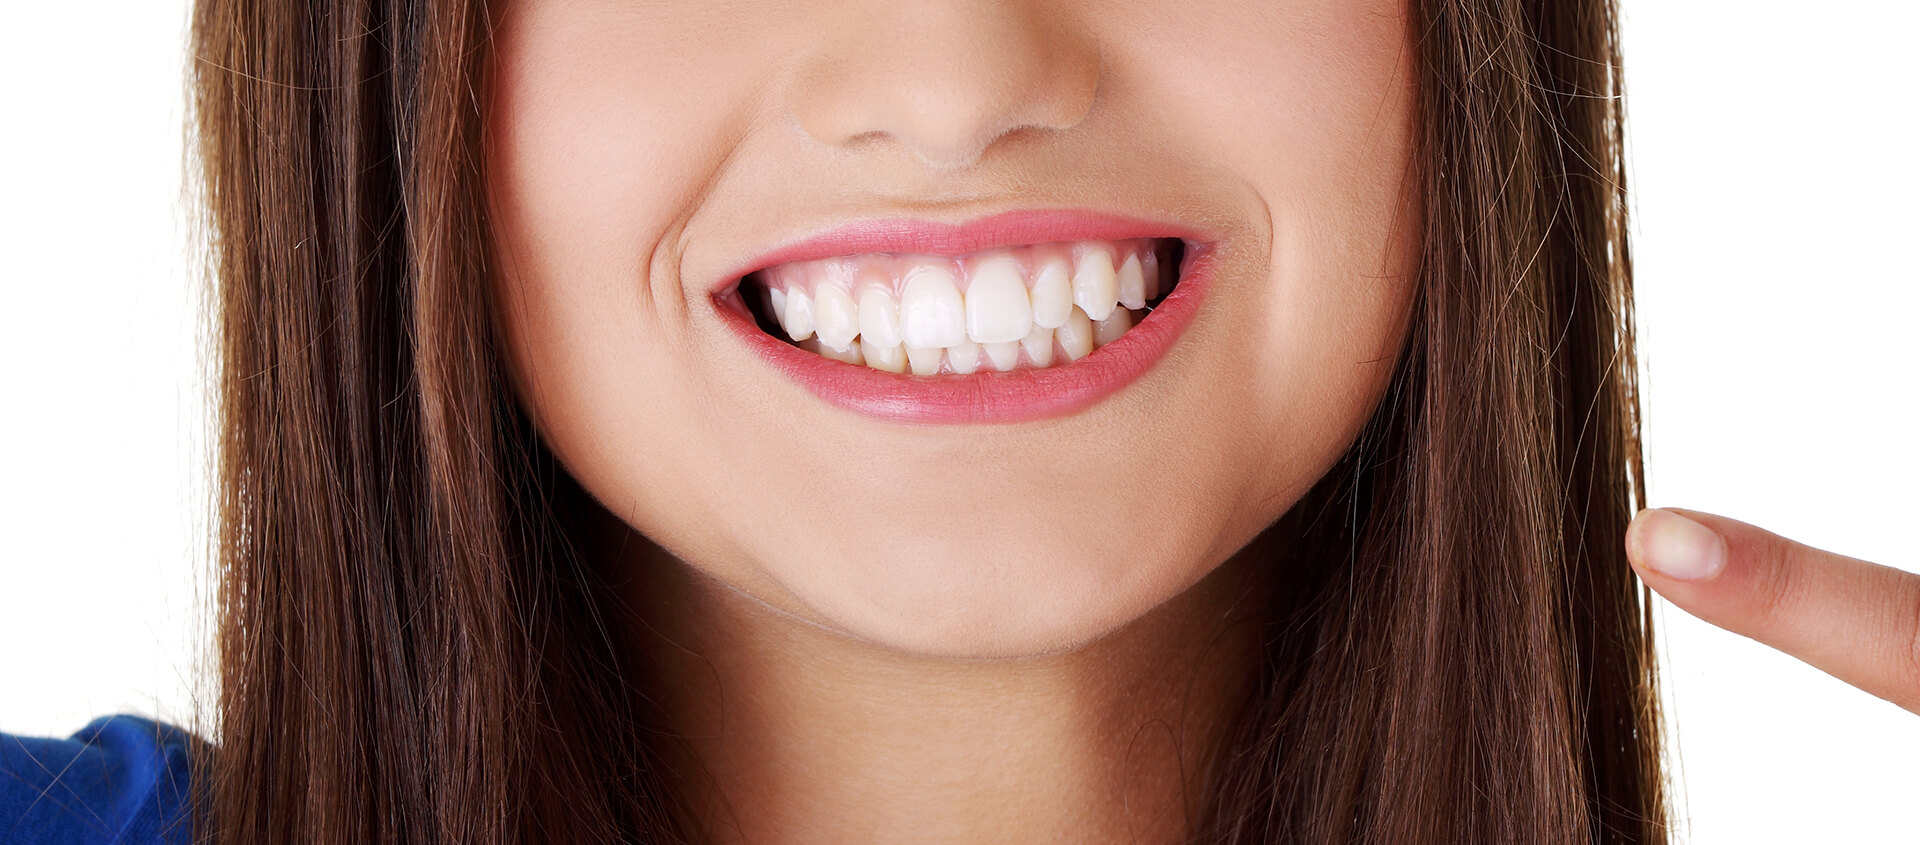 What do You need to Know About a Dentist for Oral Surgery in Thibodaux, LA Area?